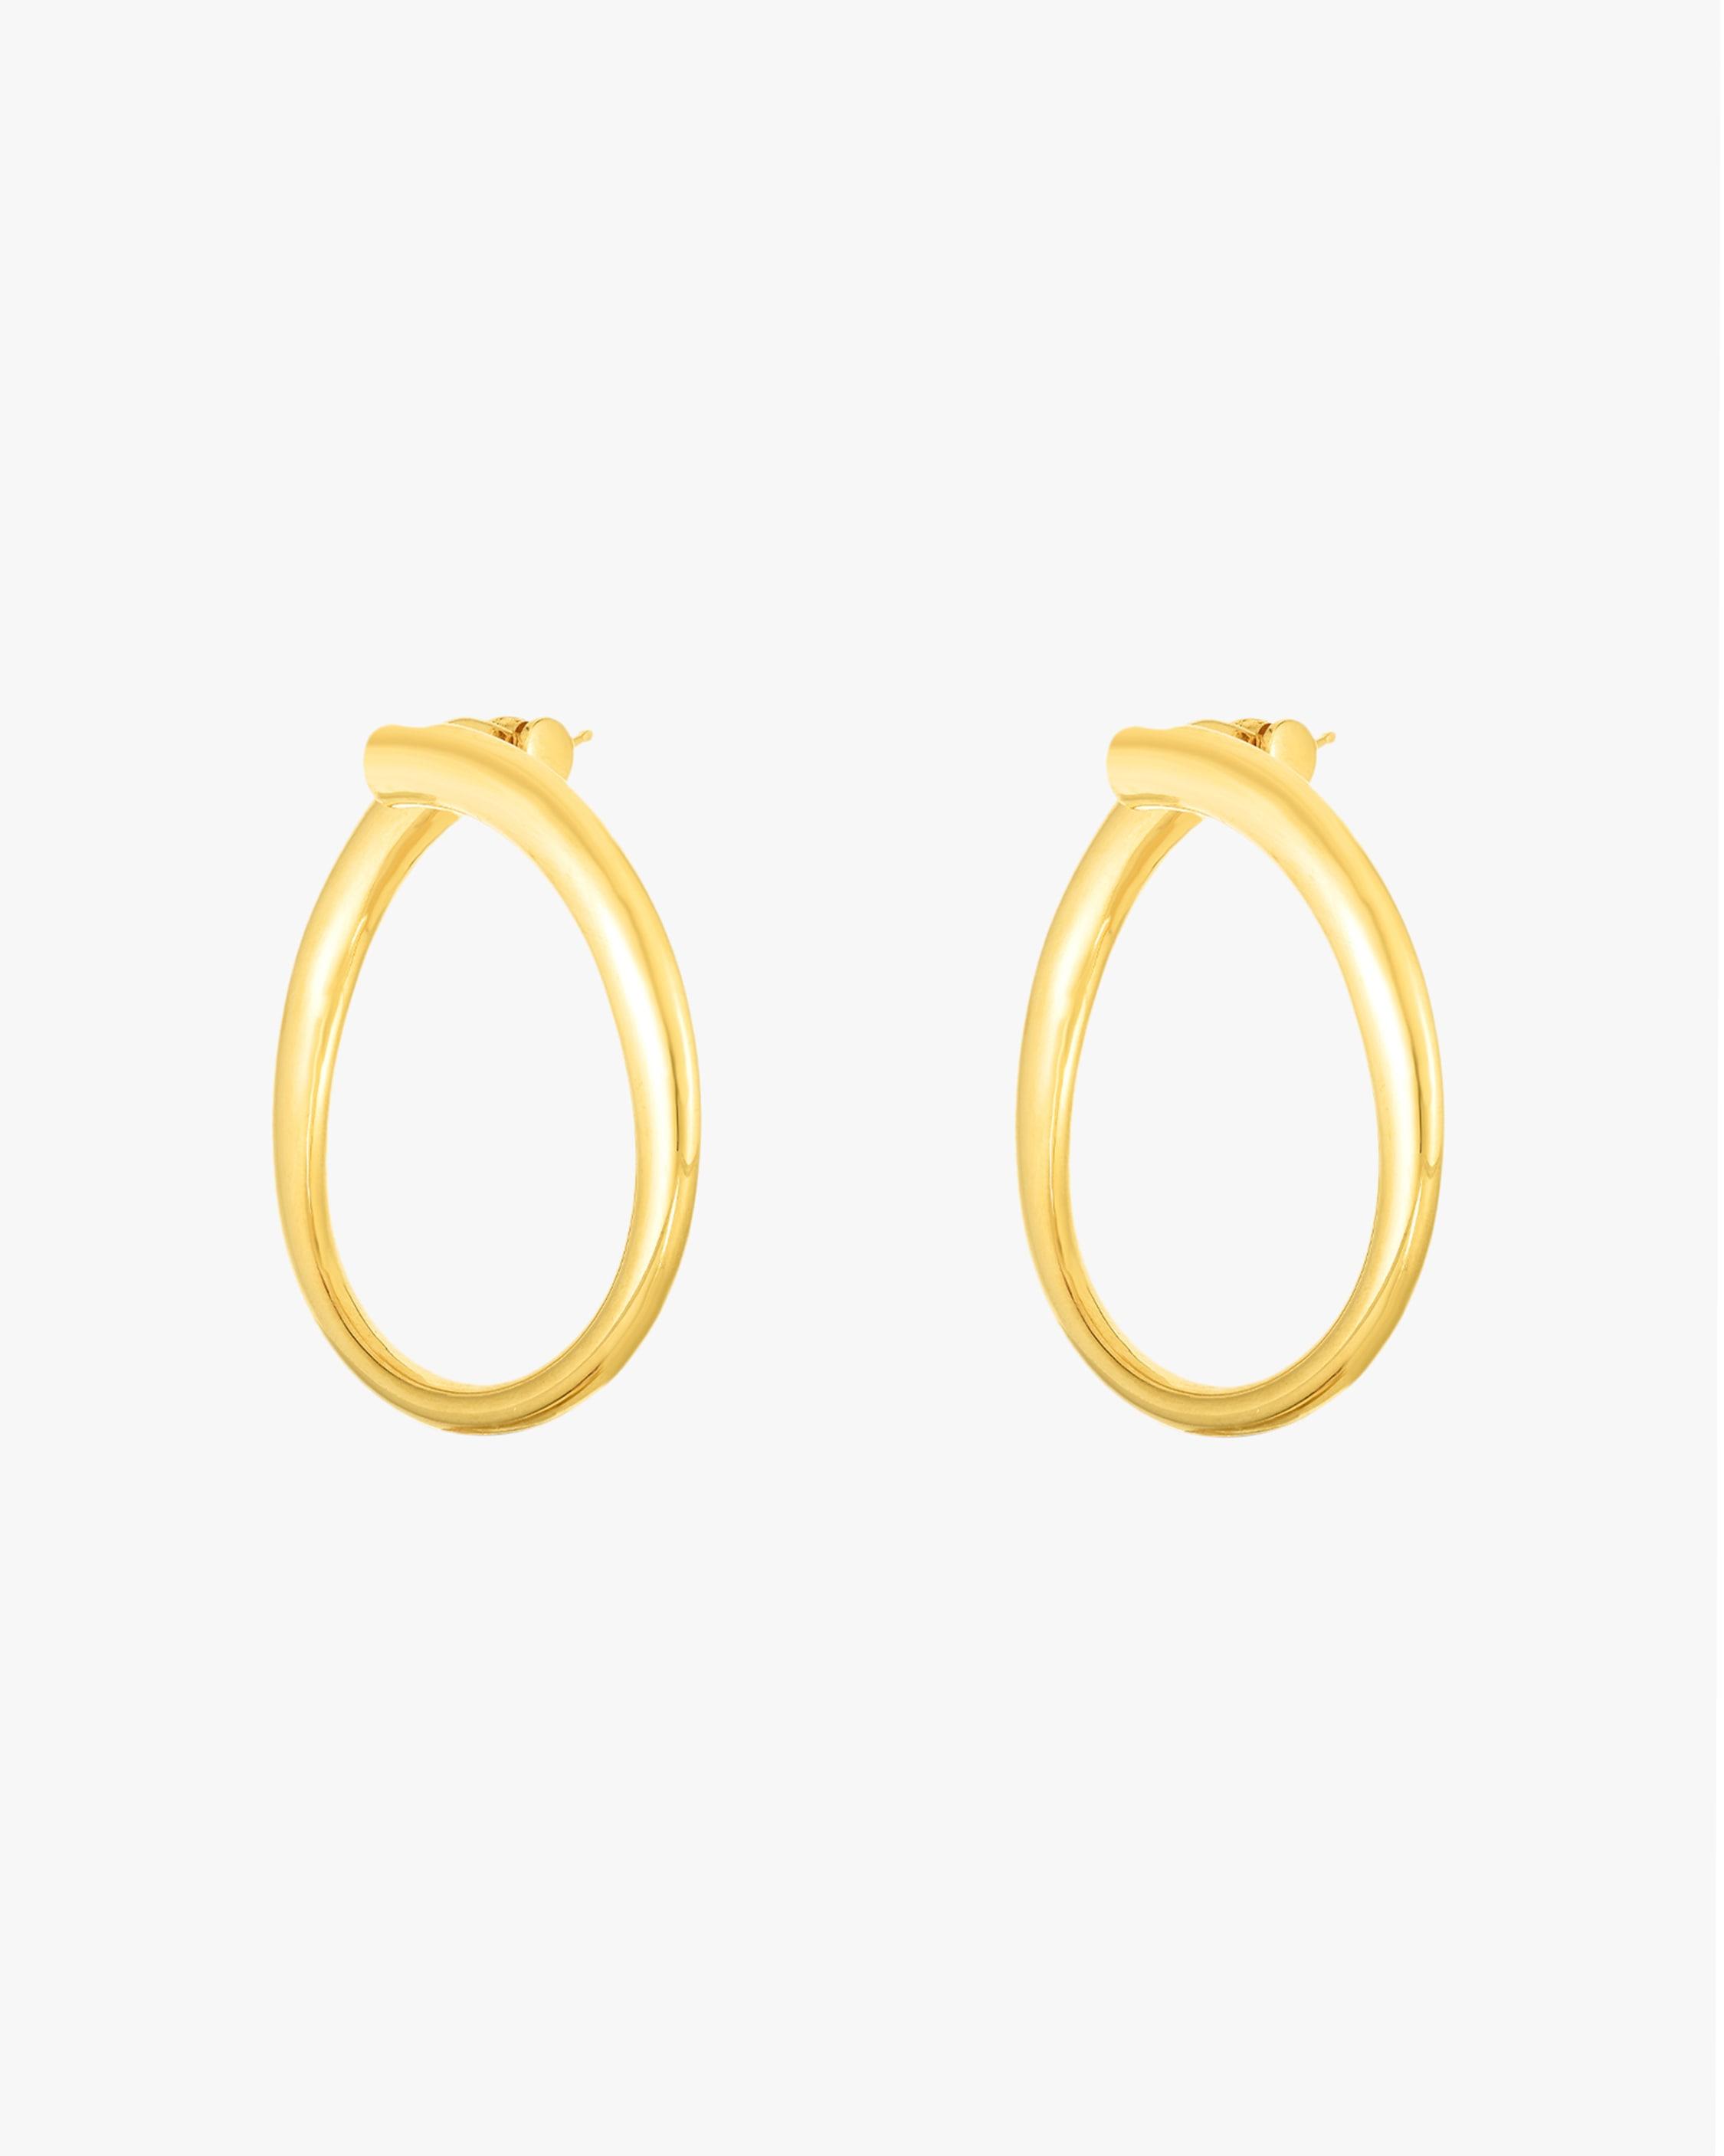 Paradise Jewelers 14K Yellow Gold Two Tone Curled Hoop Earrings